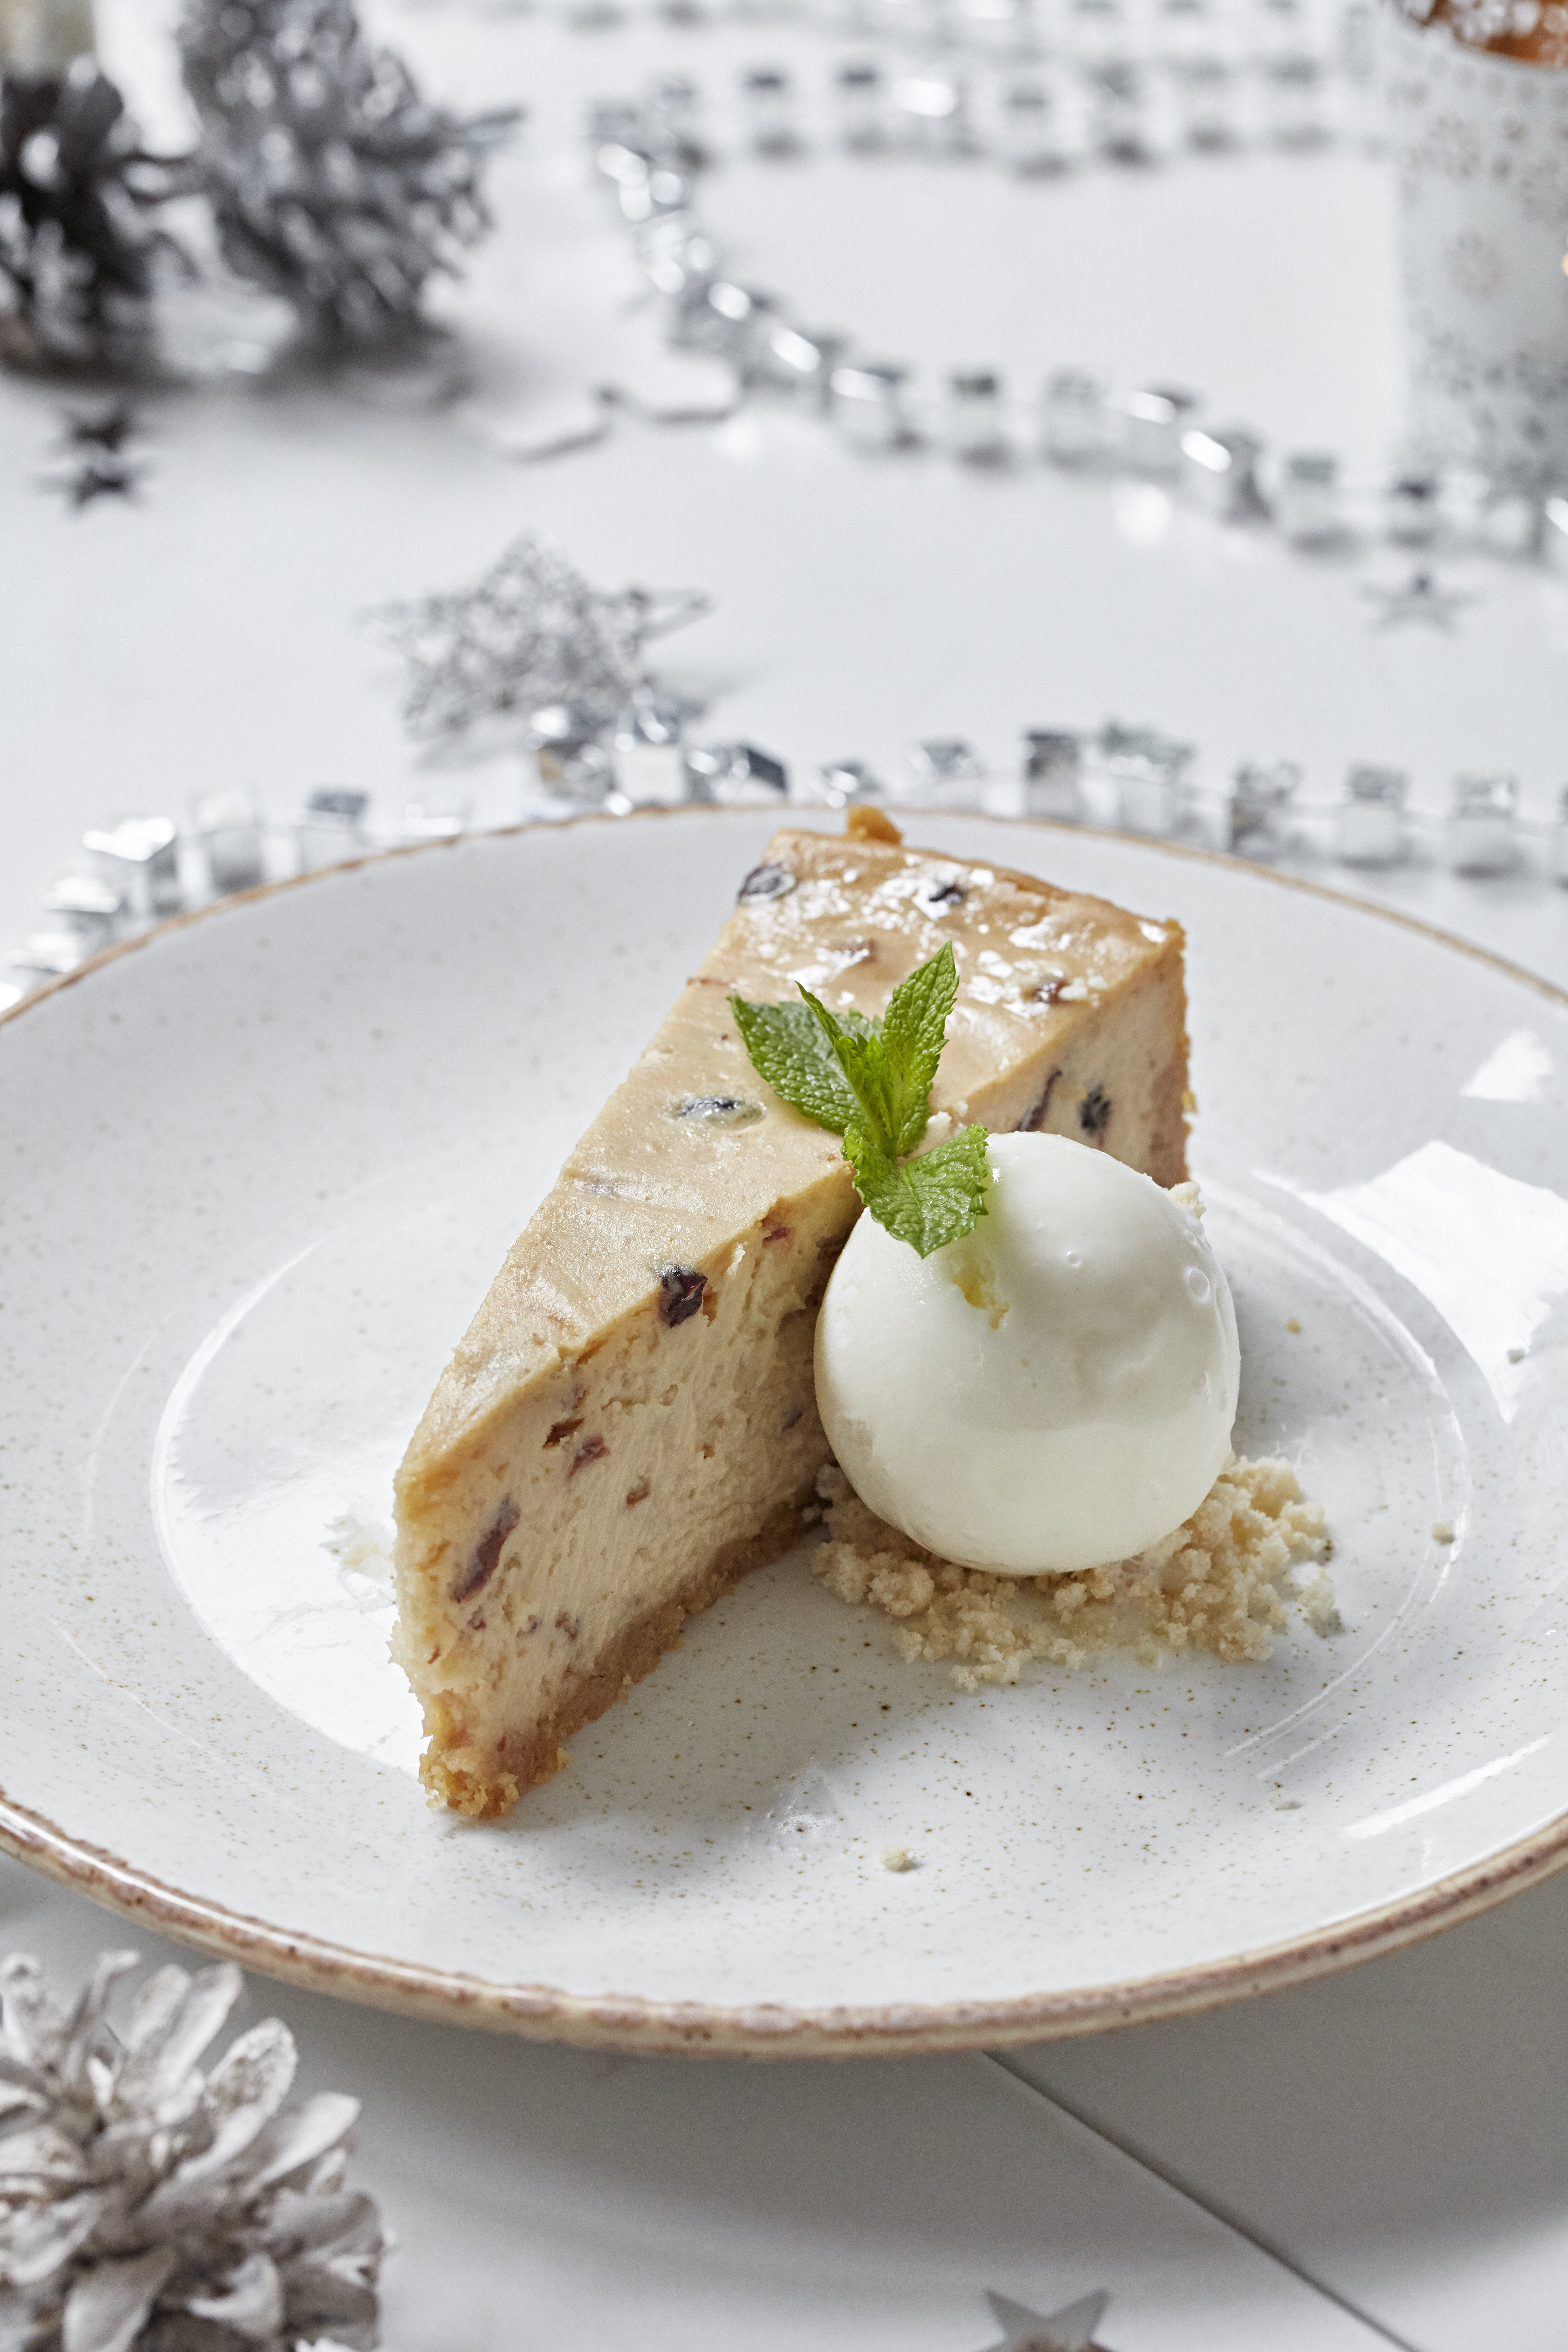 The Mince Pie Cheesecake